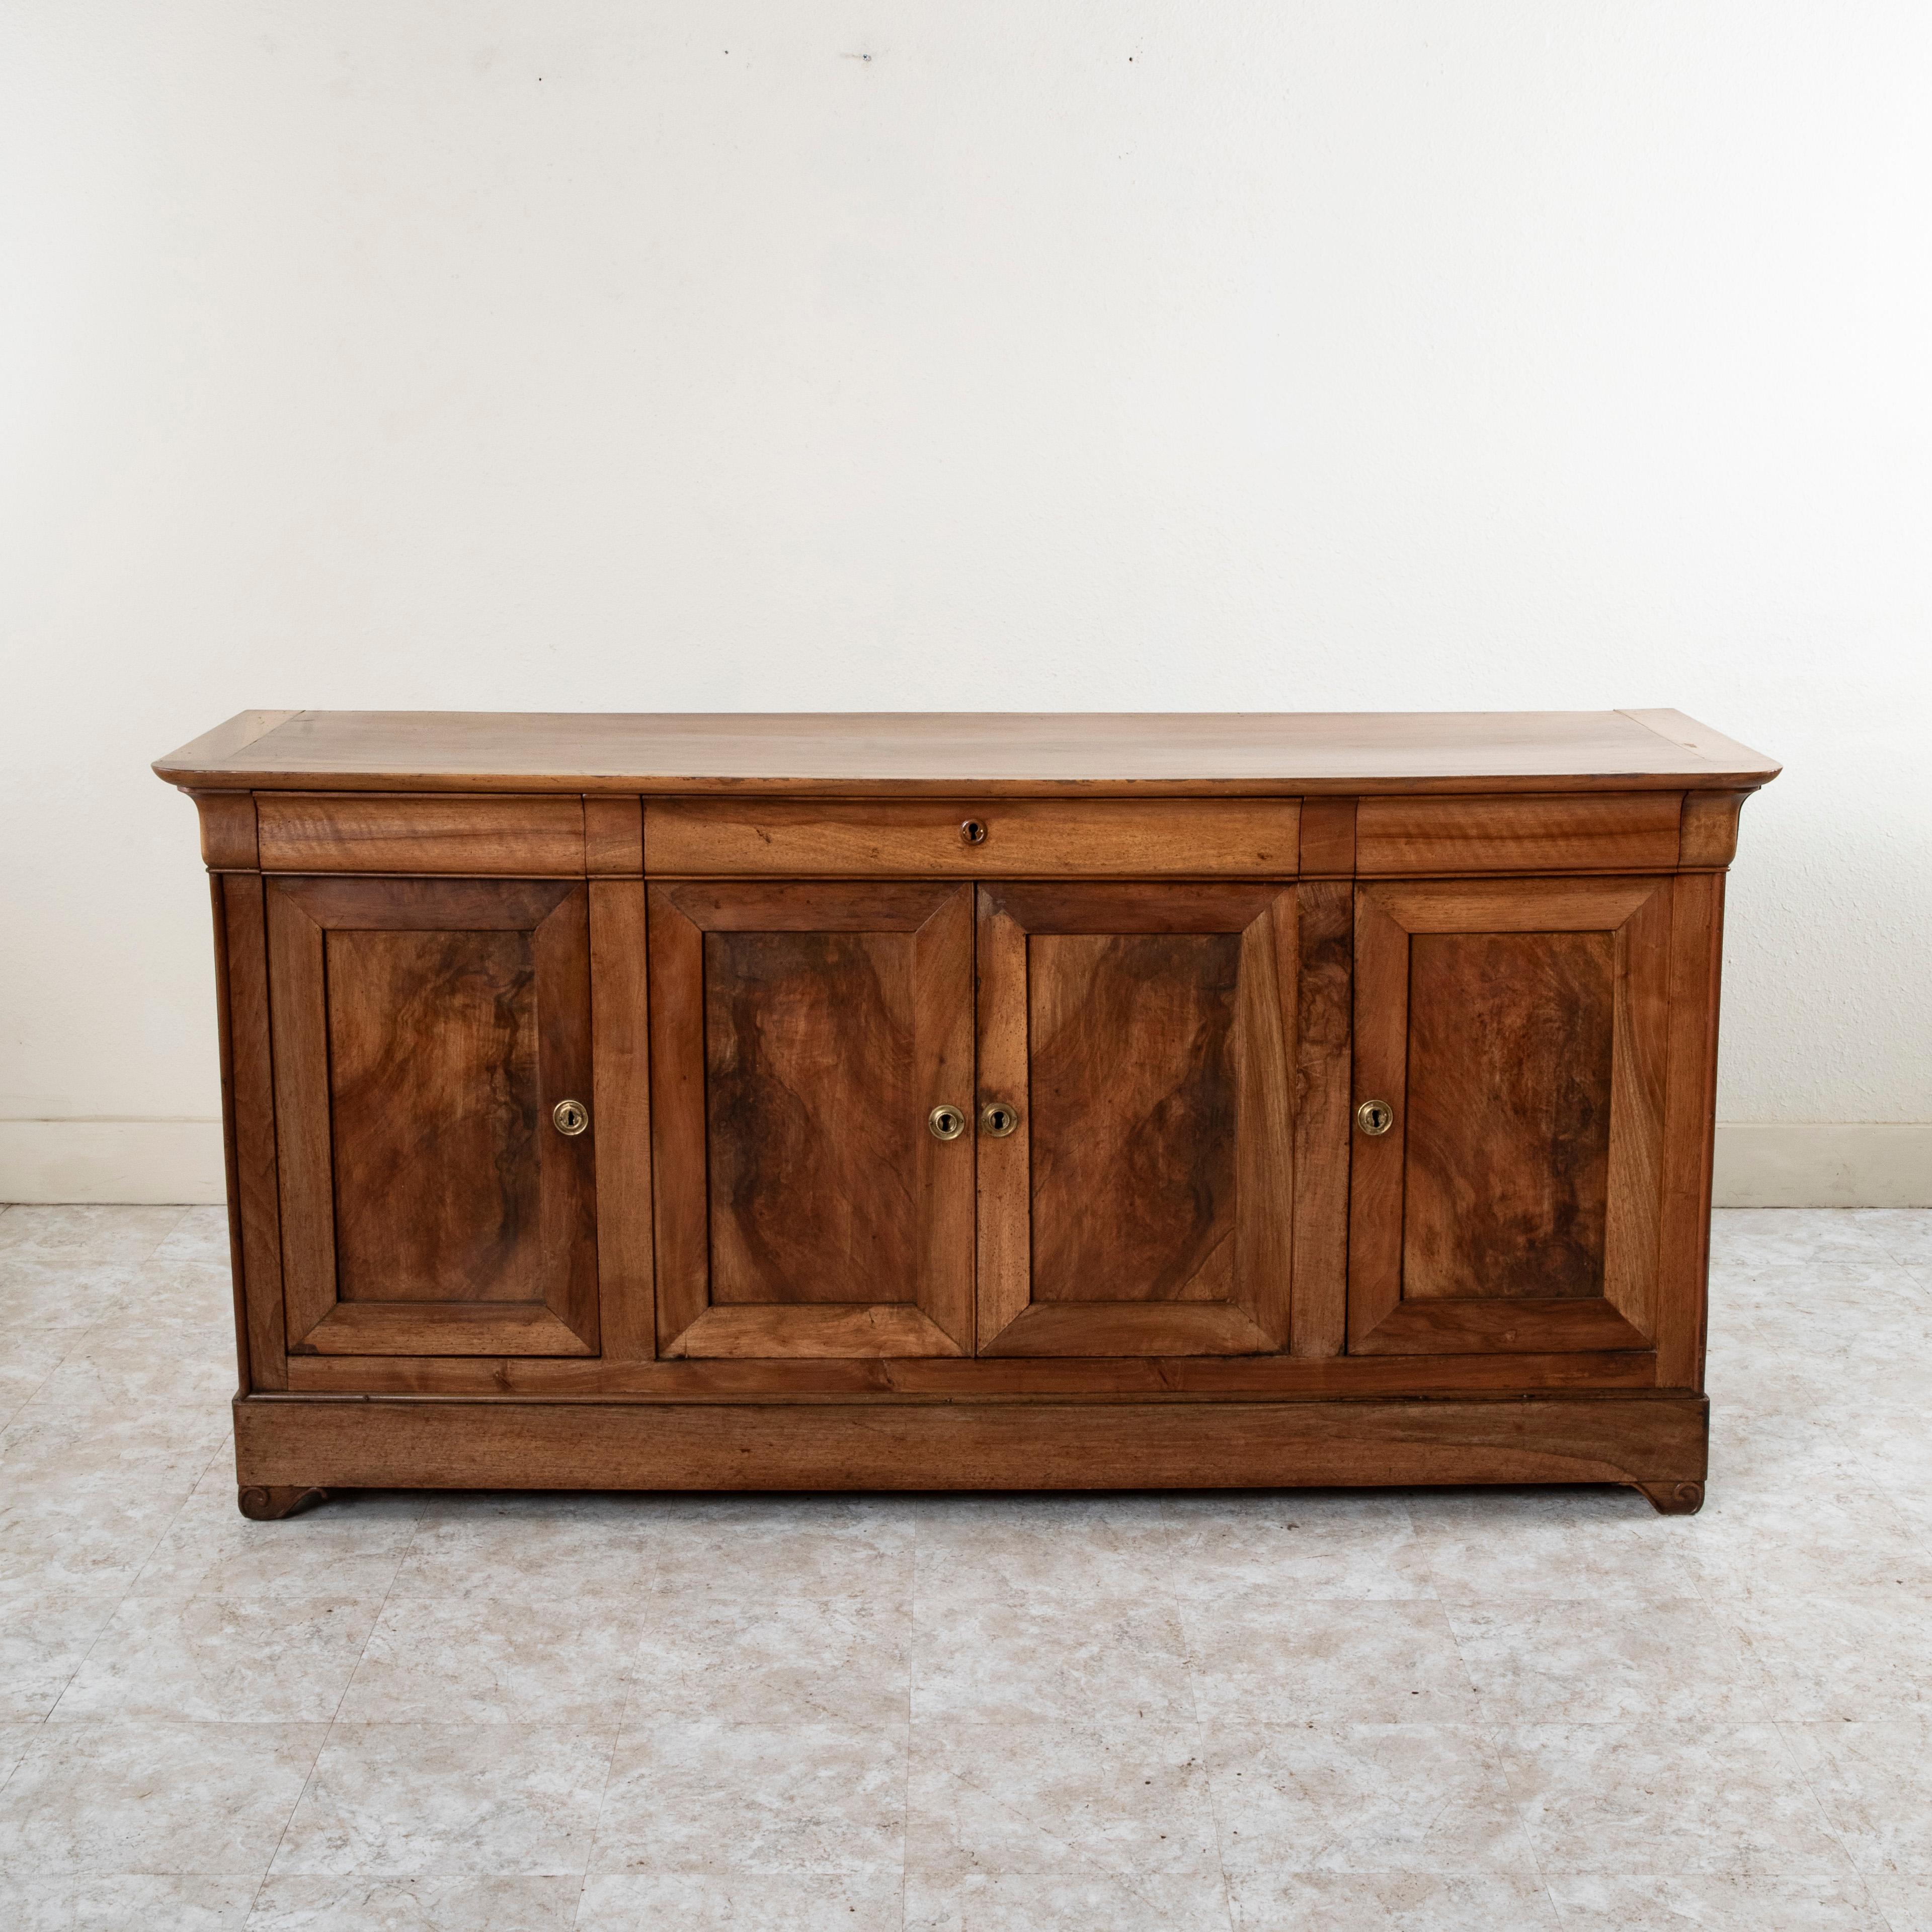 This French Louis Philippe period enfilade or sideboard from the mid-nineteenth century is constructed of solid walnut. This server features three drawers of dovetail construction that fit seamlessly into the apron below the top. Below are four